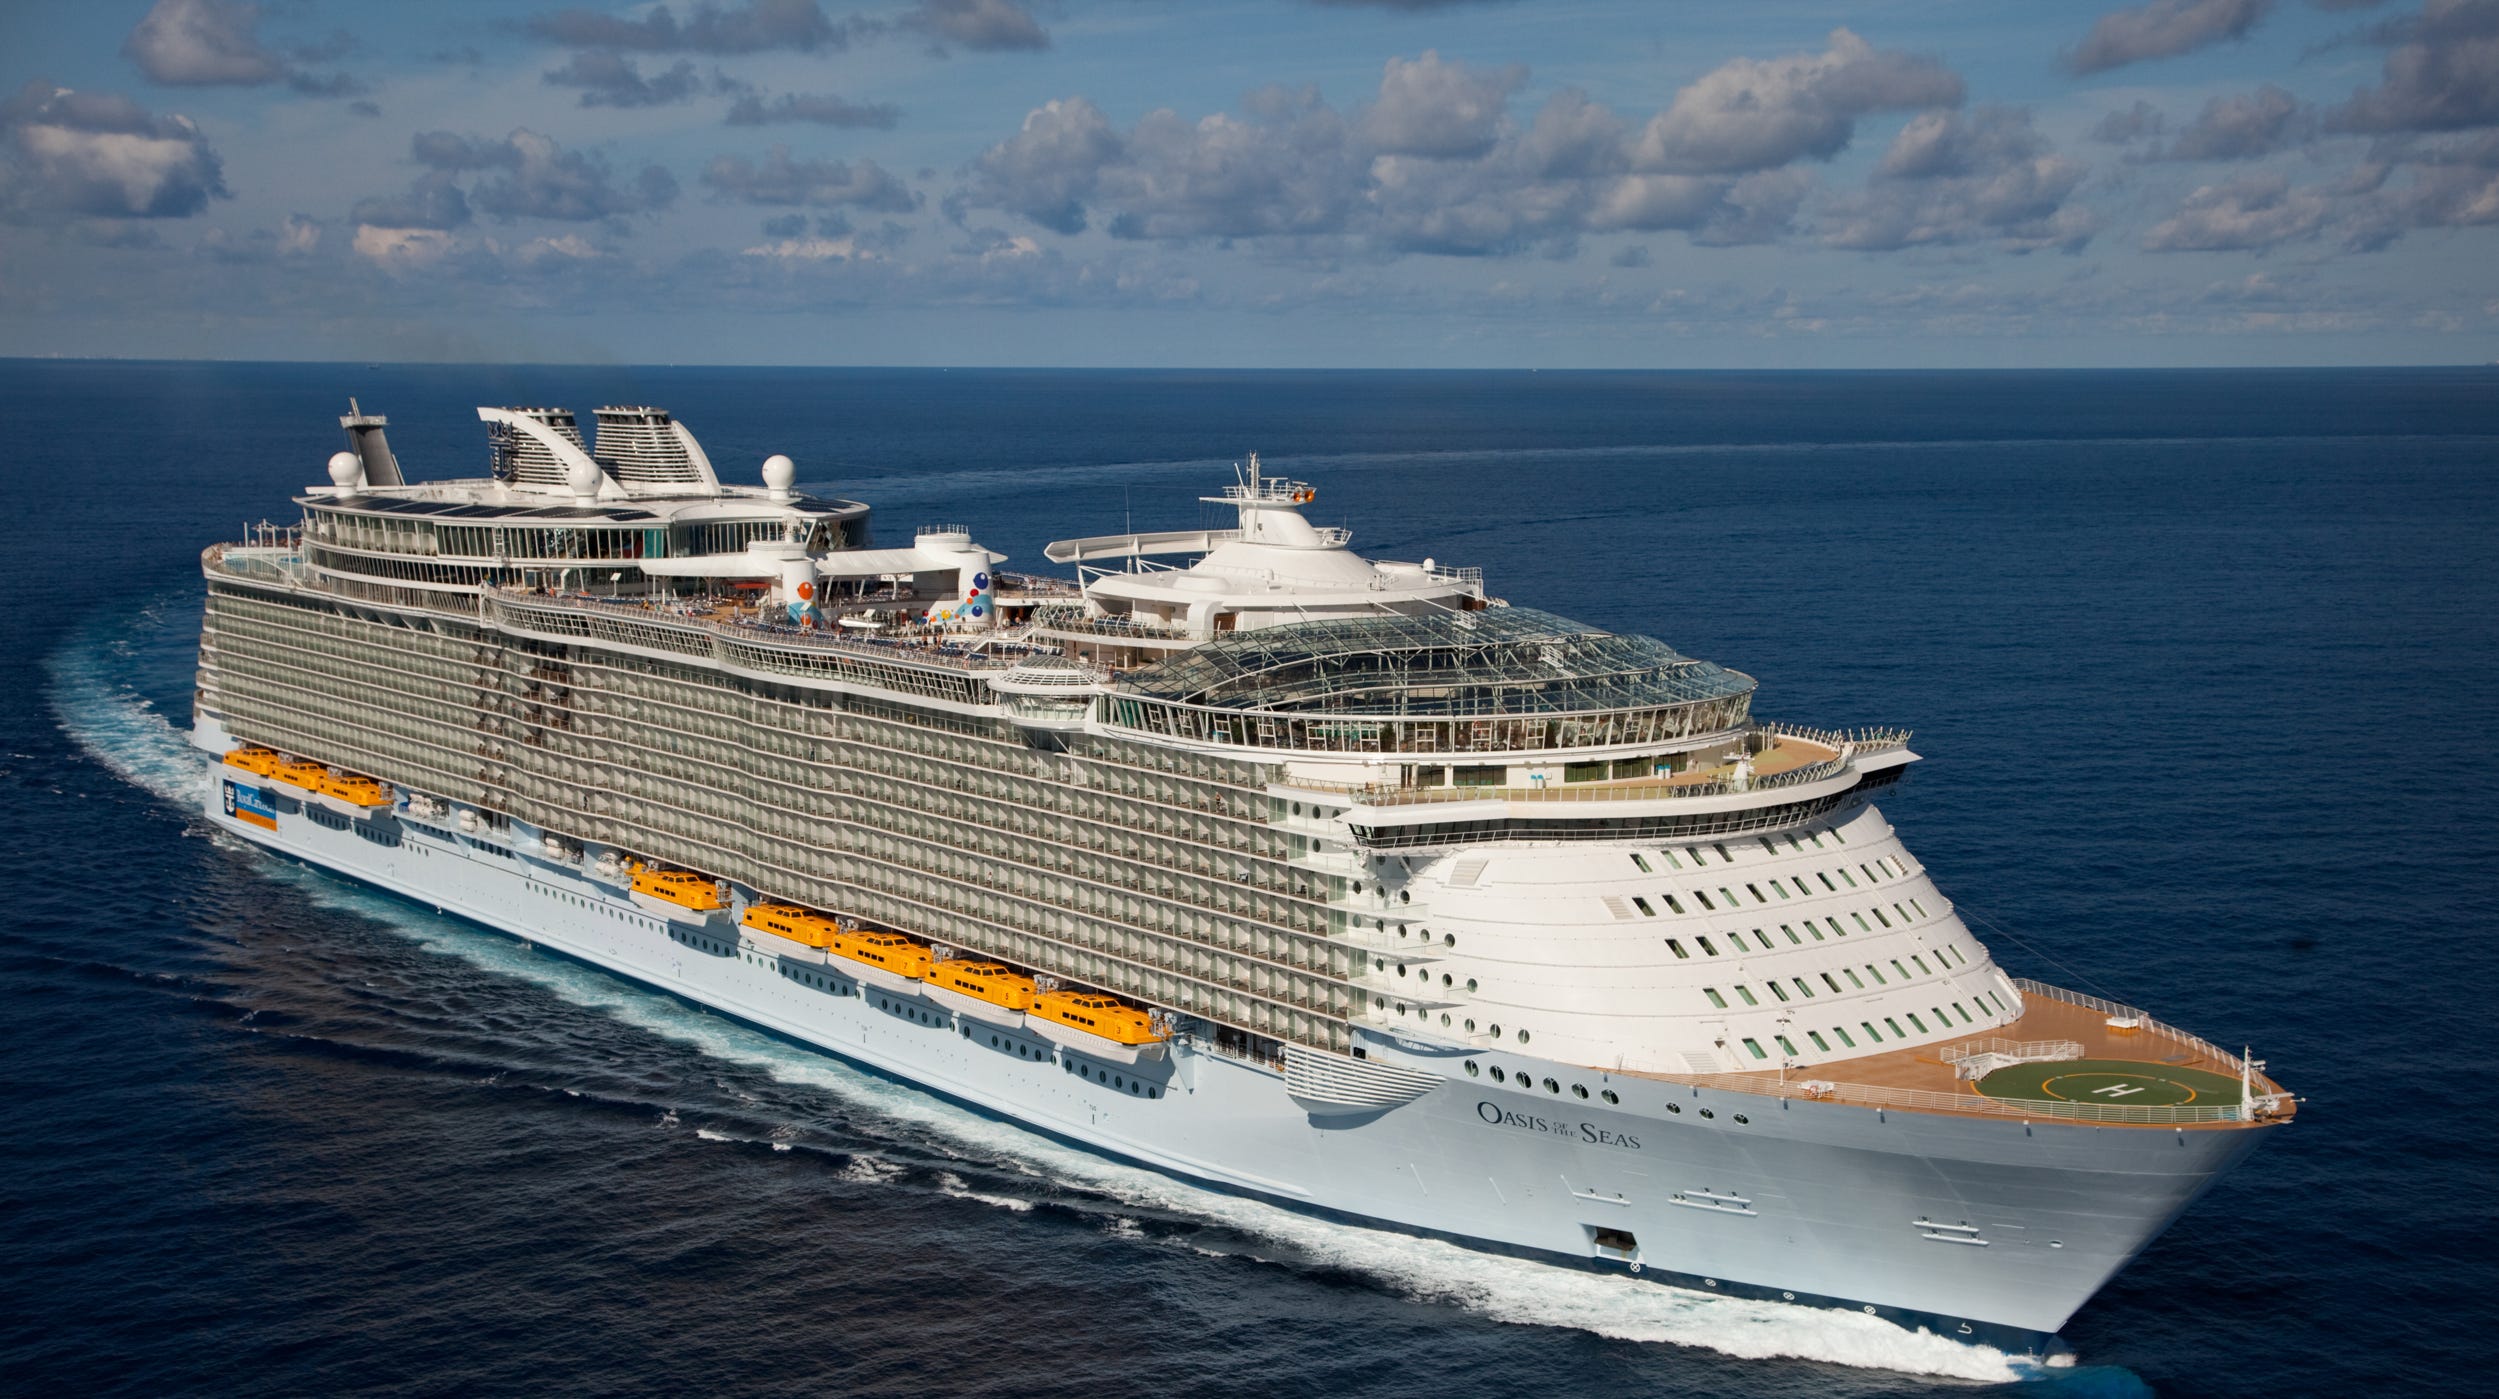 Oasis of the Seas: Giant cruise ship to begin trips from New York area